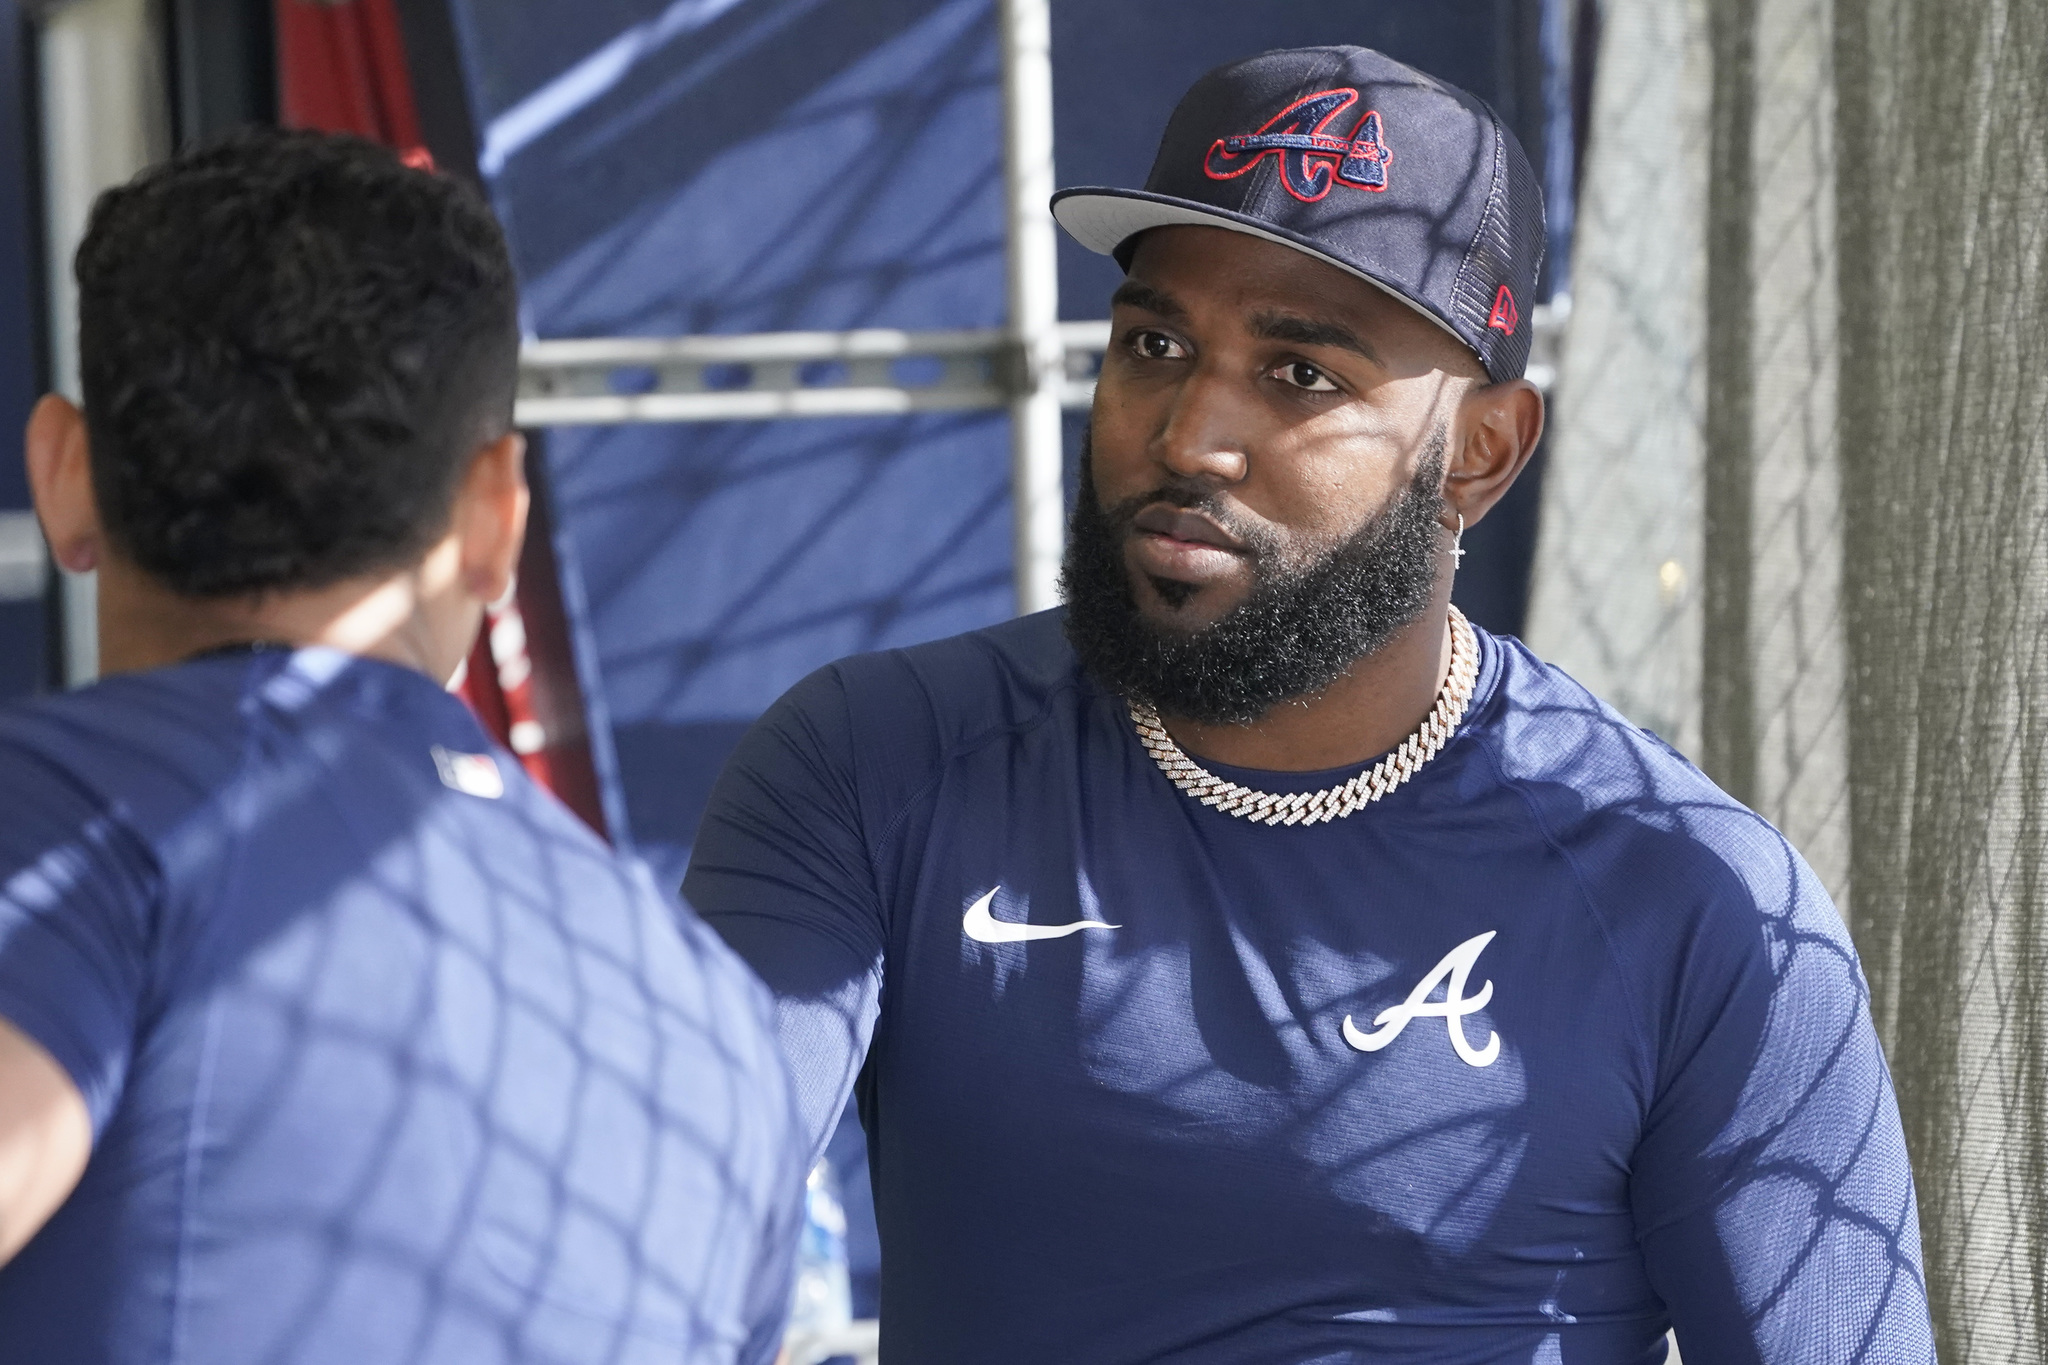 Marcell Ozuna talks to a teammate in the batting cages during spring training baseball practice at CoolToday Park.